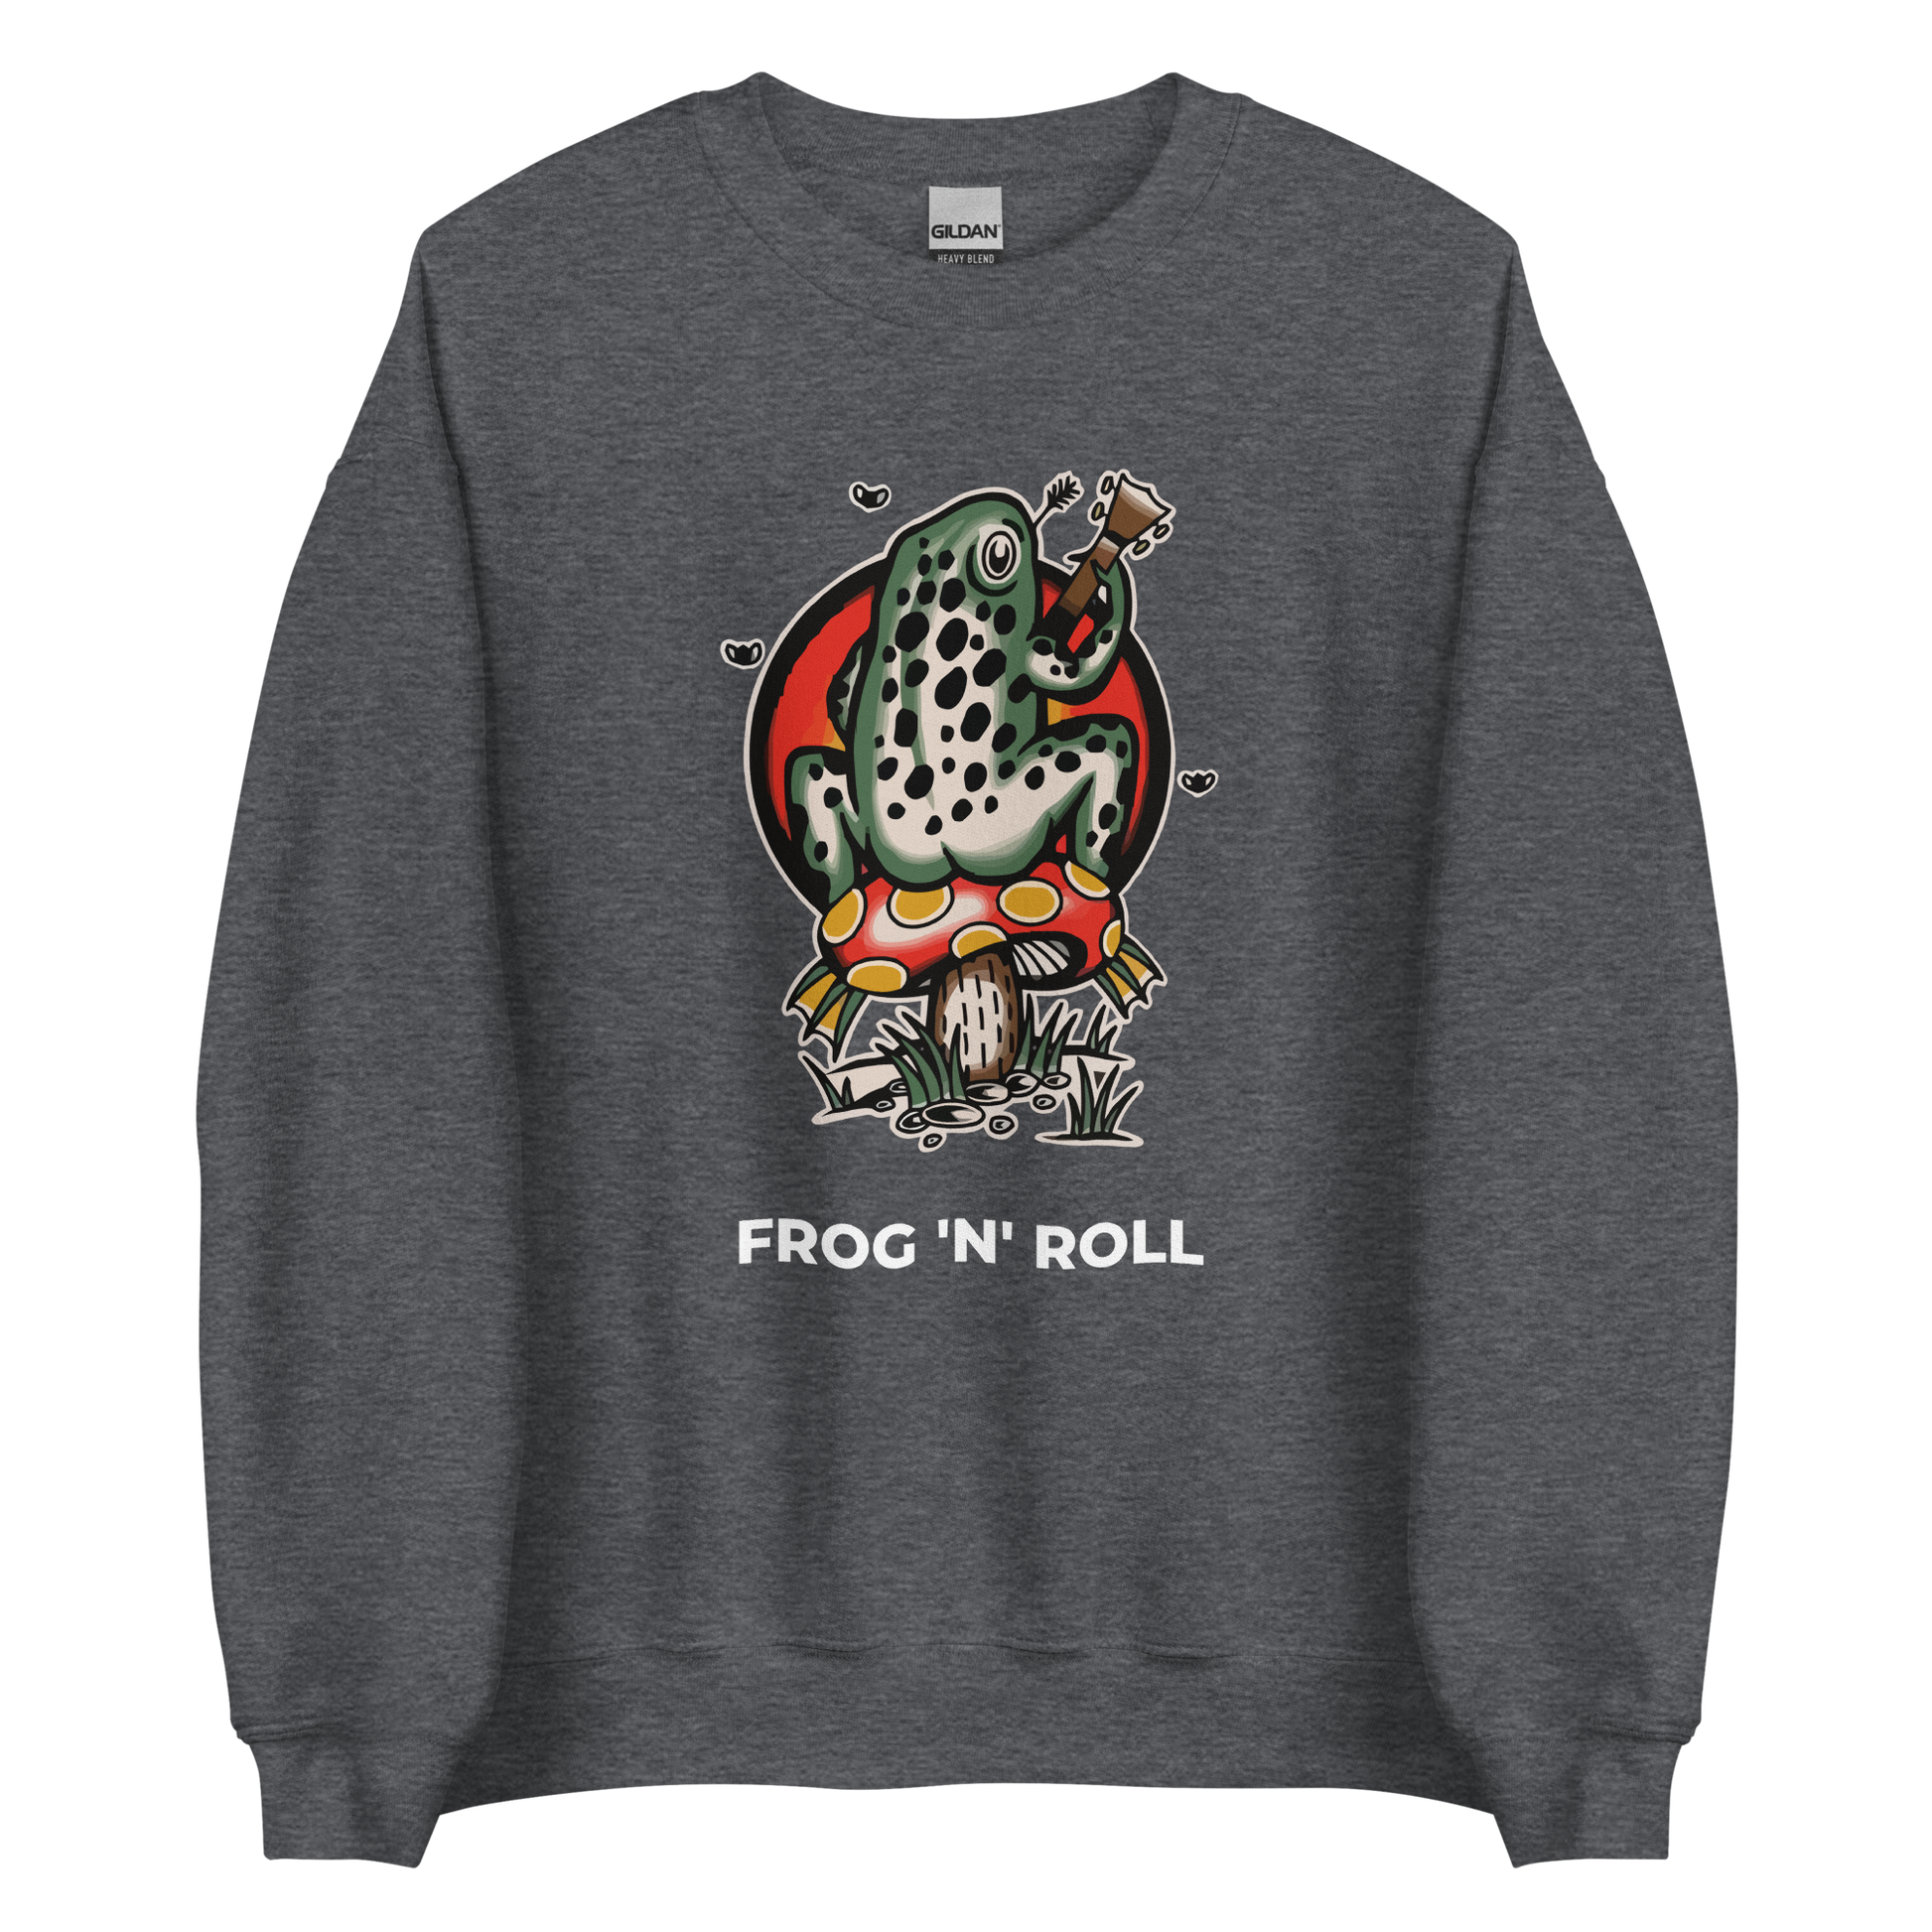 Dark Heather Frog Sweatshirt featuring the hilarious Frog 'n' Roll graphic on the chest - Funny Graphic Frog Sweatshirts - Boozy Fox